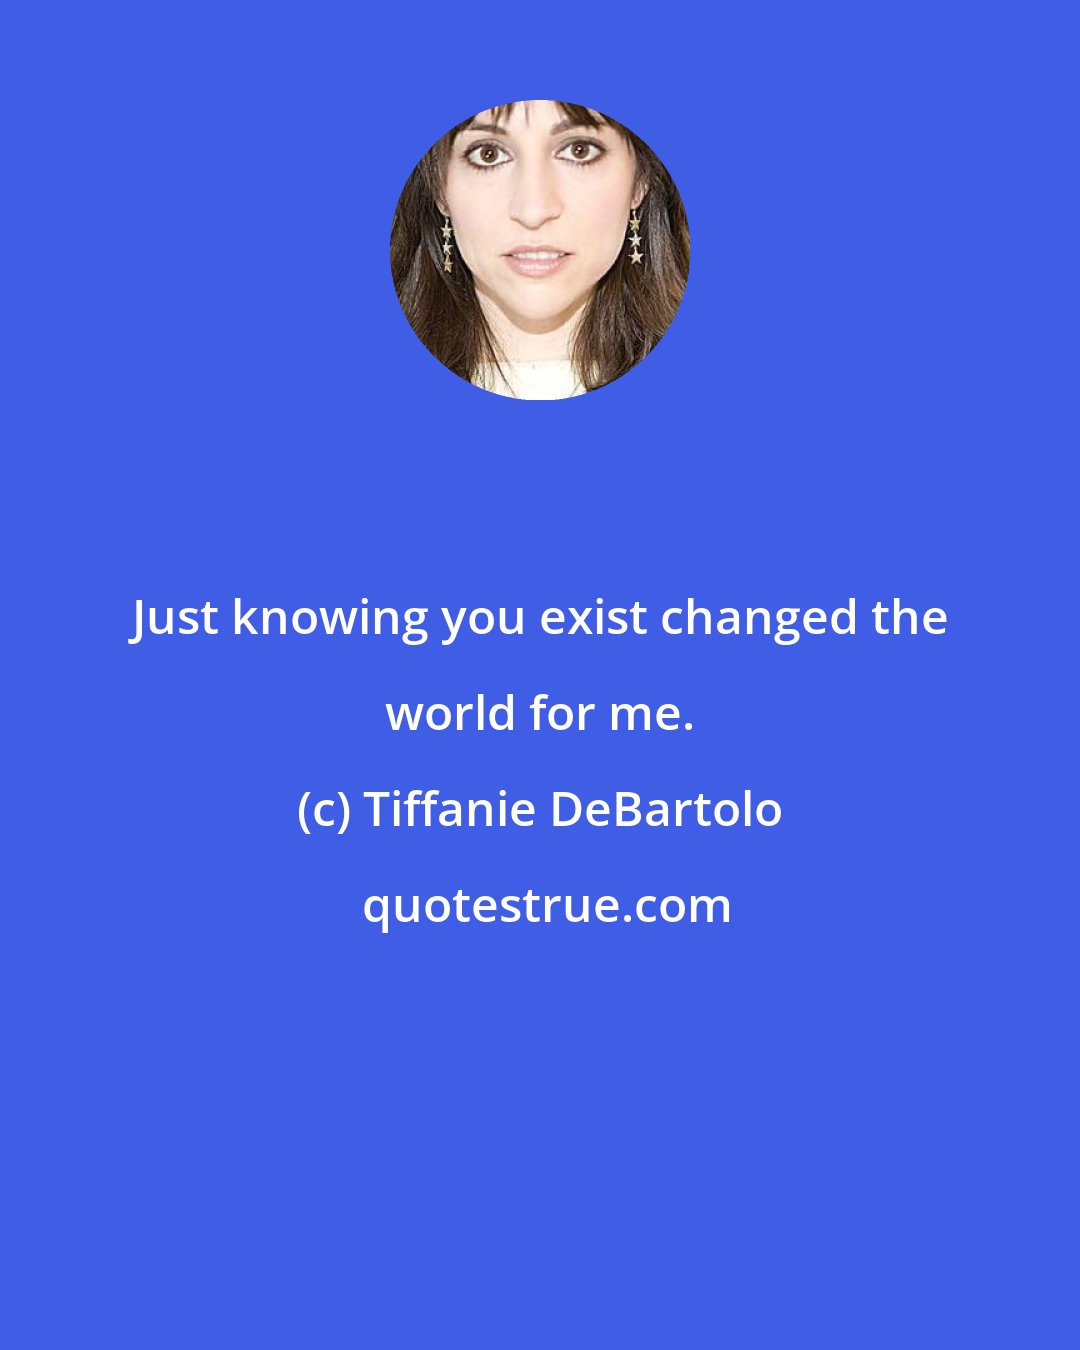 Tiffanie DeBartolo: Just knowing you exist changed the world for me.